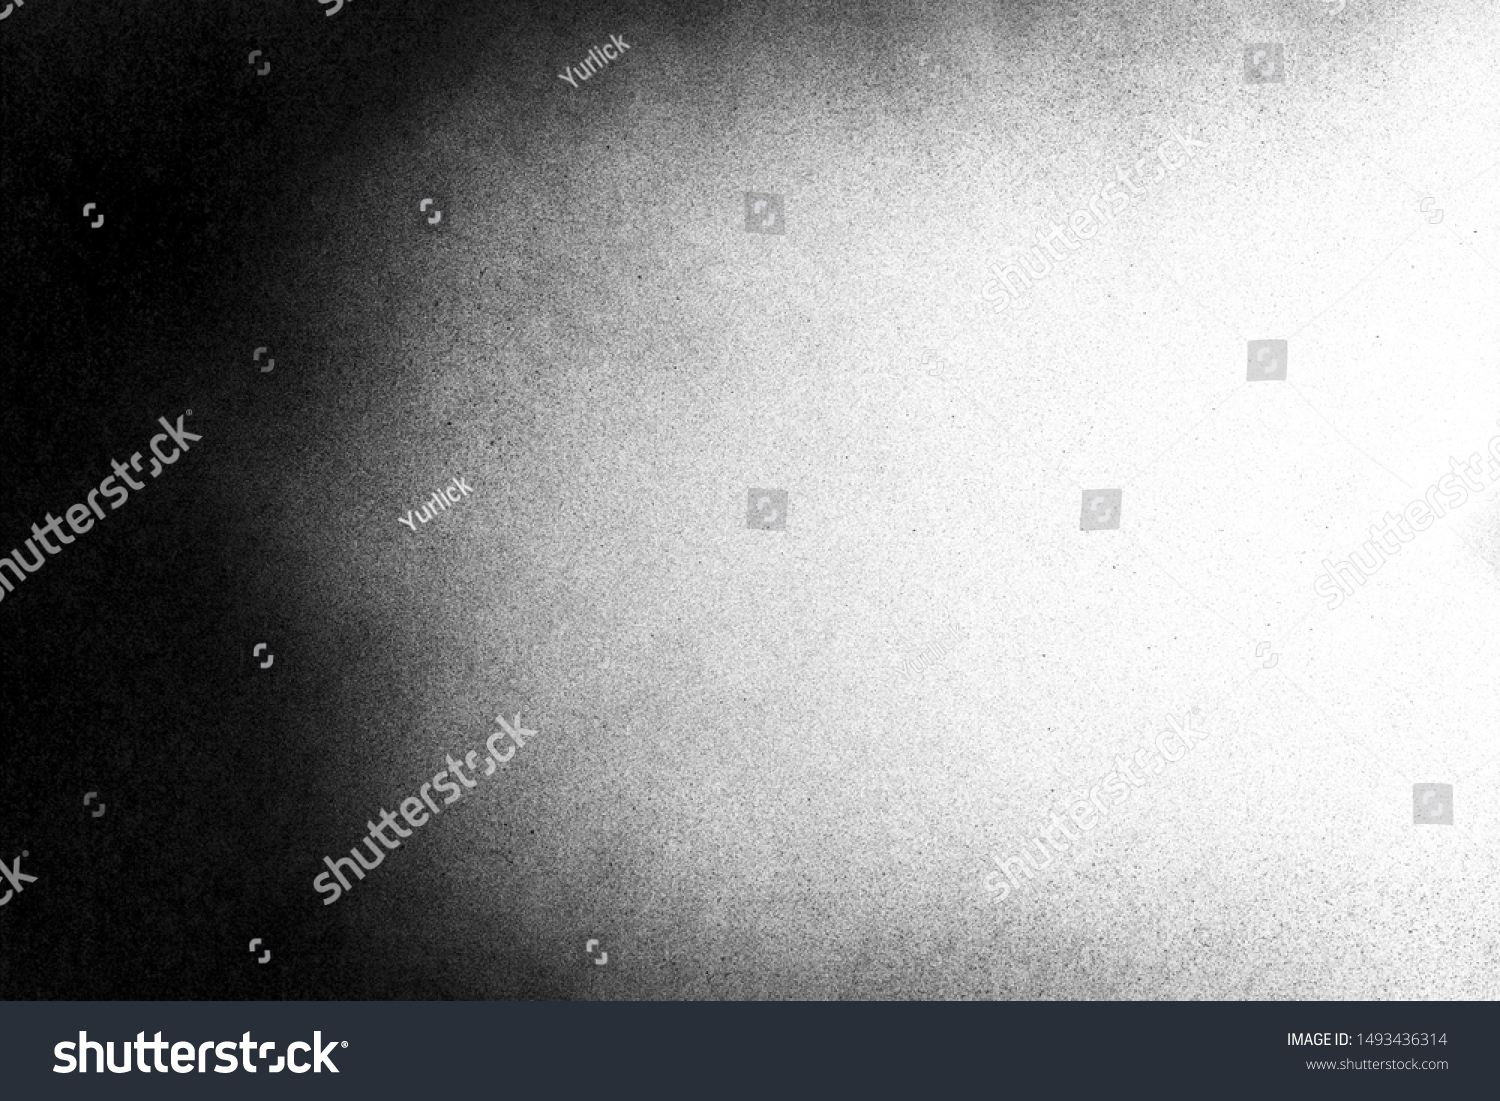 Vintage black and white noise texture. Abstract splattered background for vignette. #1493436314